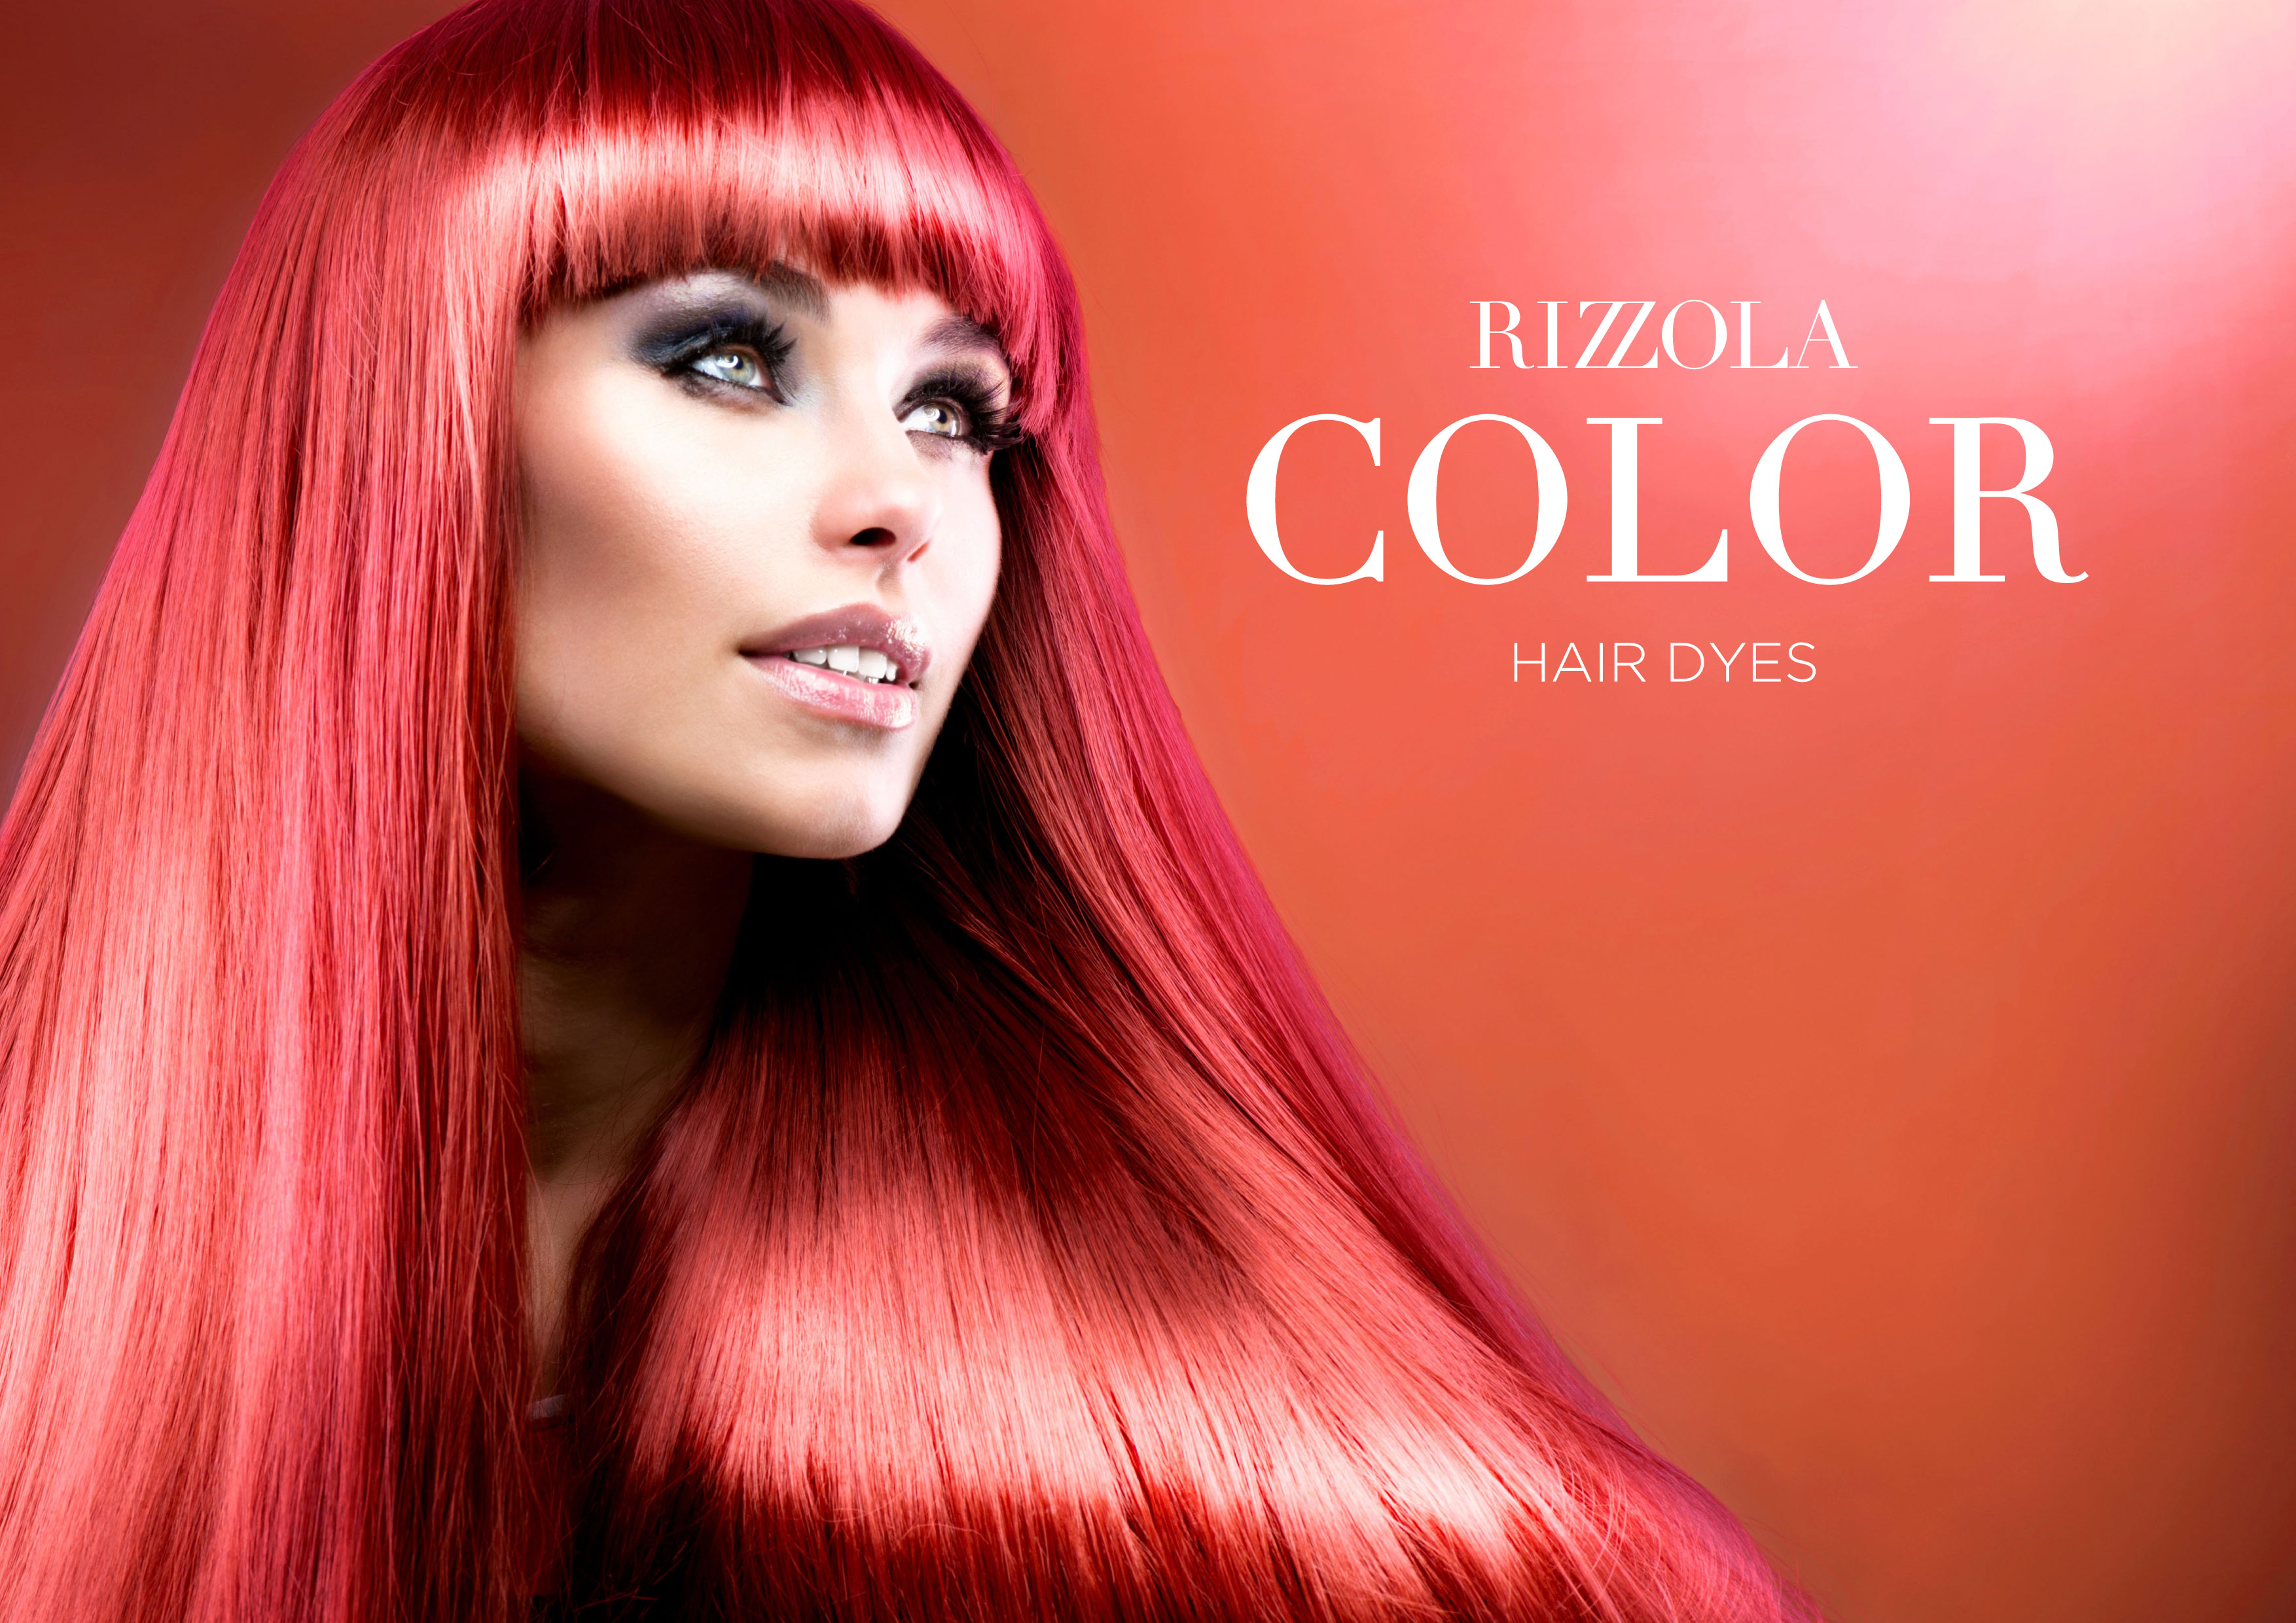 RIZZOLA COLOR HAIR DYES